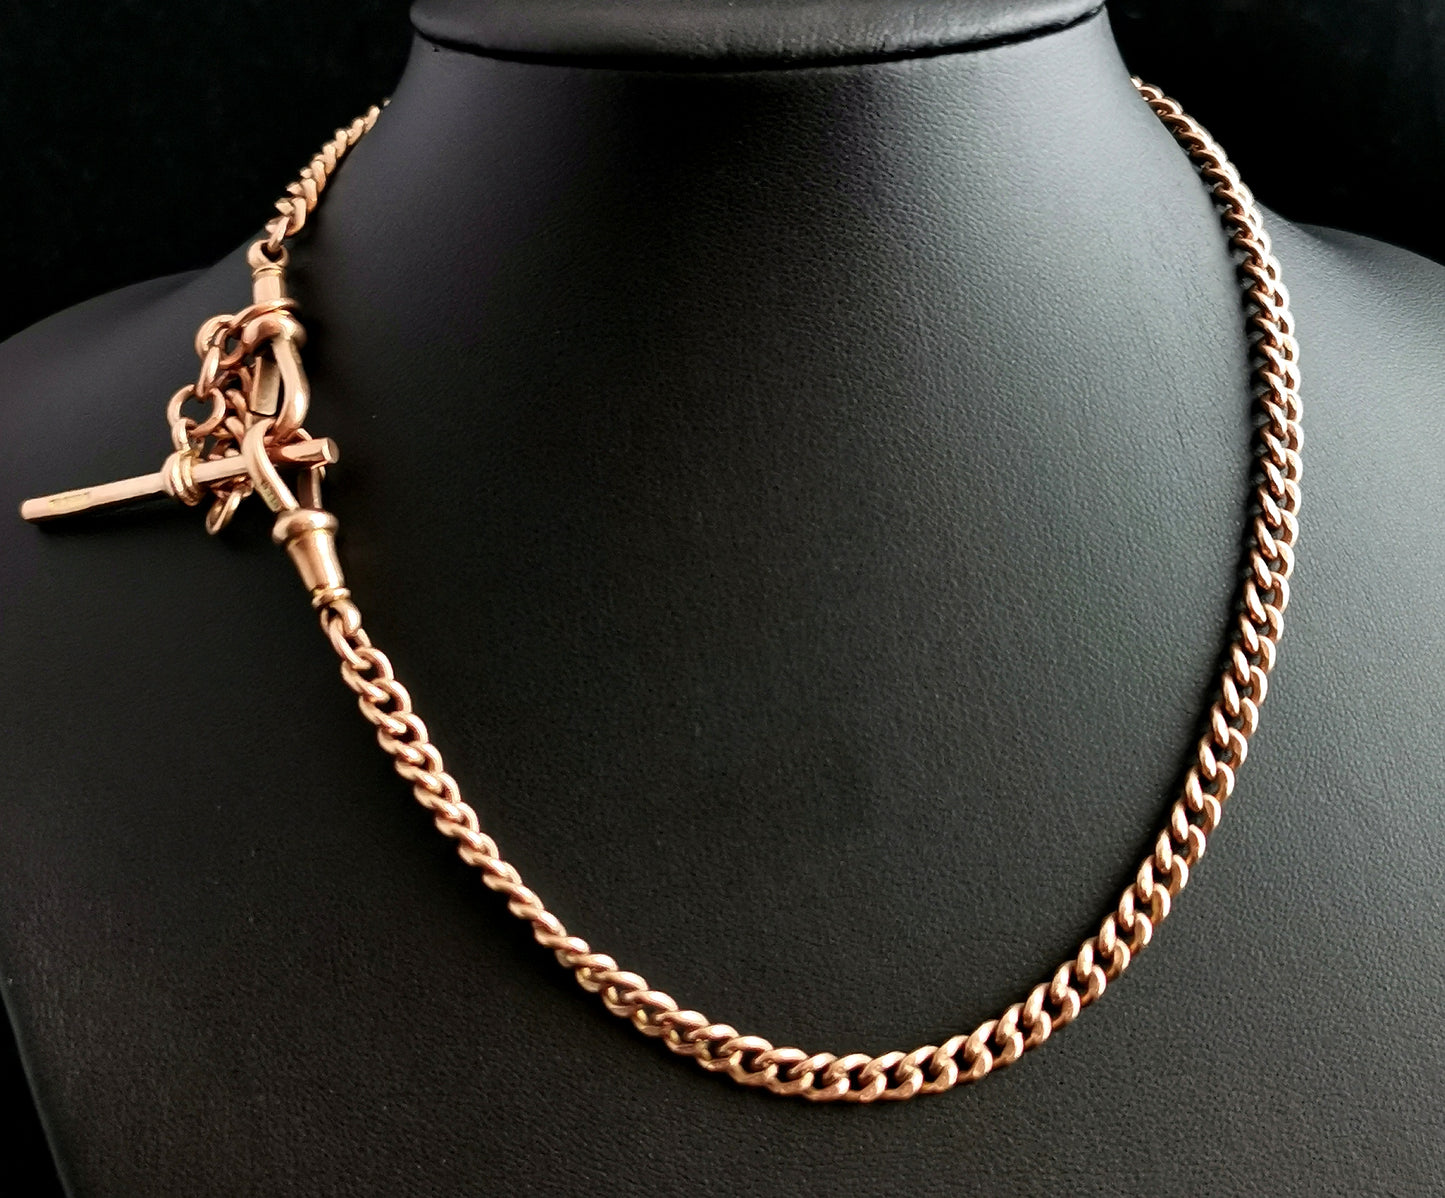 Antique 9ct Rose gold Albert chain, curb link, watch chain necklace, Victorian